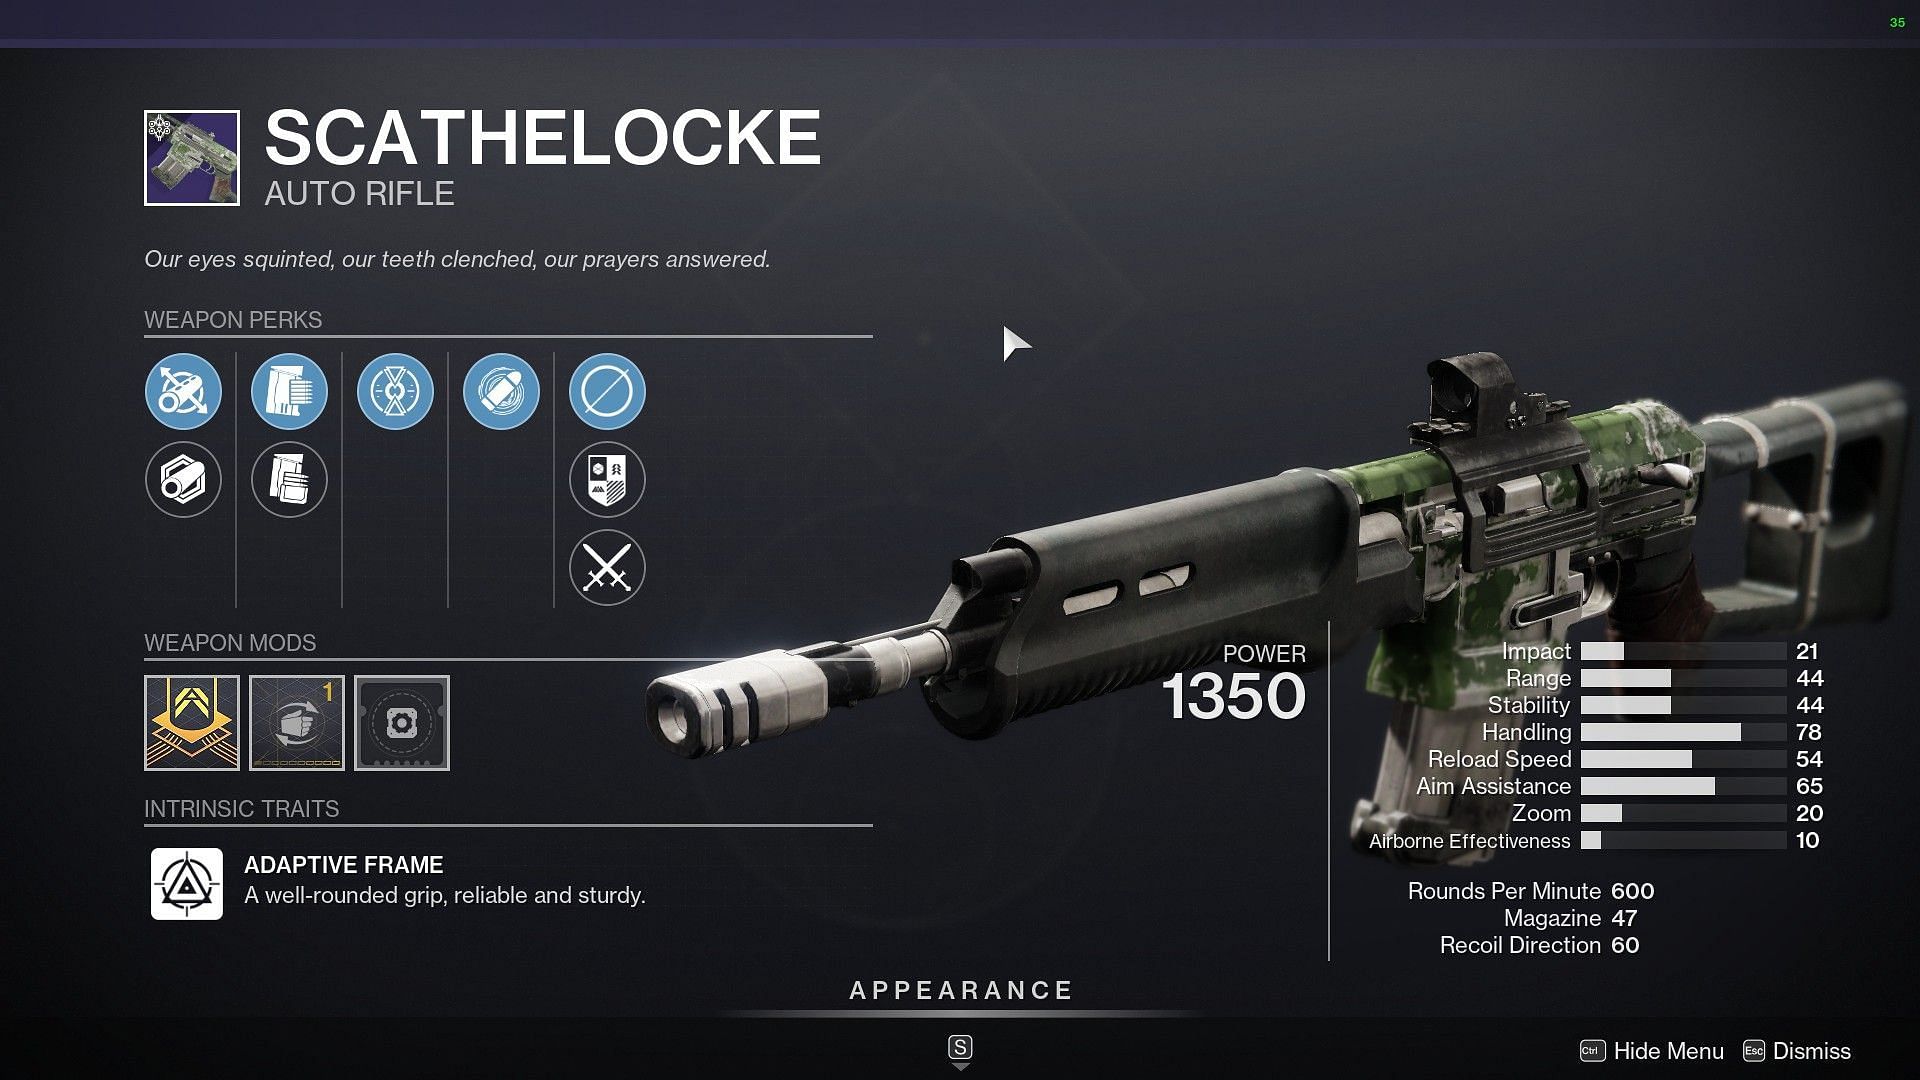 Scathelocke Kinetic Auto Rifle for sale this week from Banshee (Image via Destiny 2)